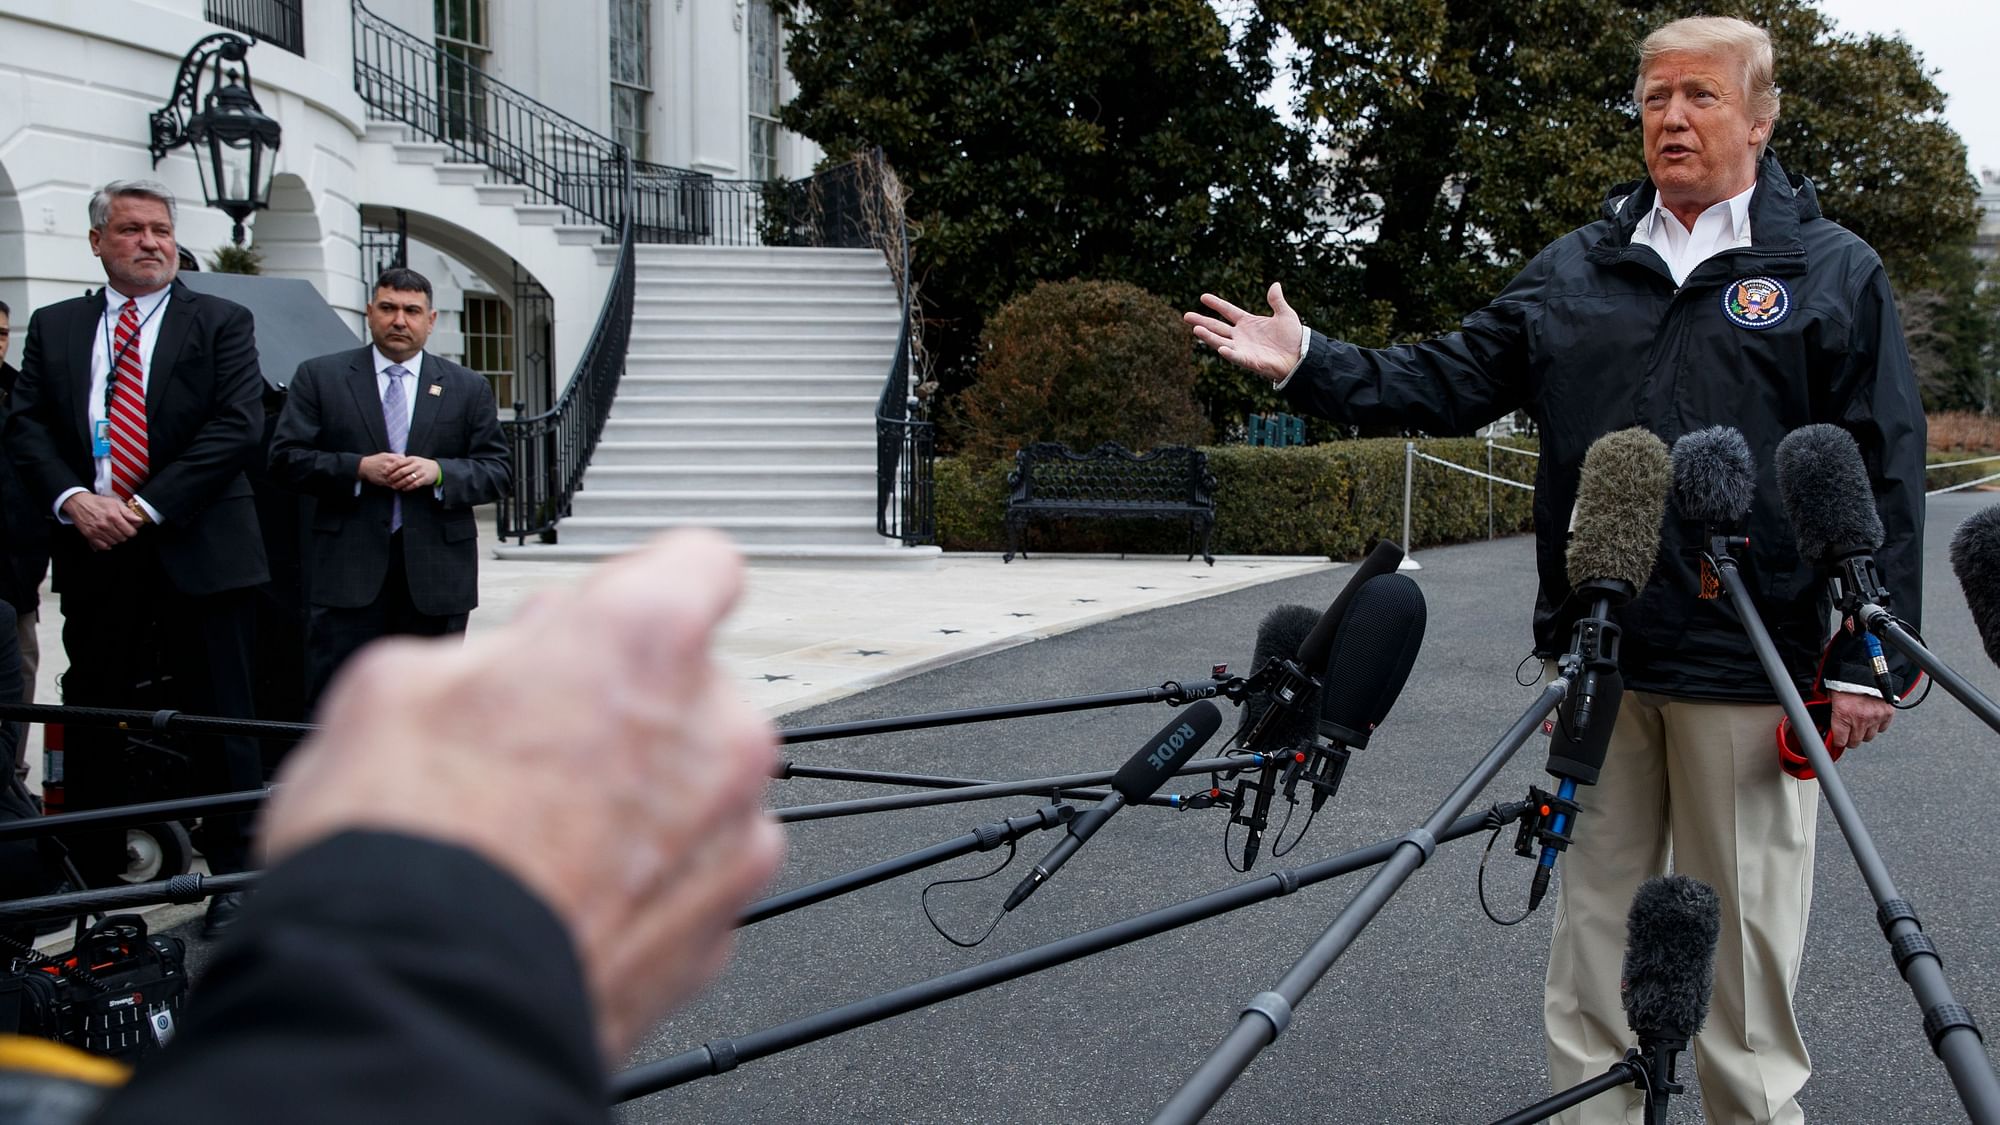 White House deputy chief of staff for communications Bill Shine, left, looks on as President Donald Trump talks with reporters outside the White House, Friday, March 8, 2019, in Washington.